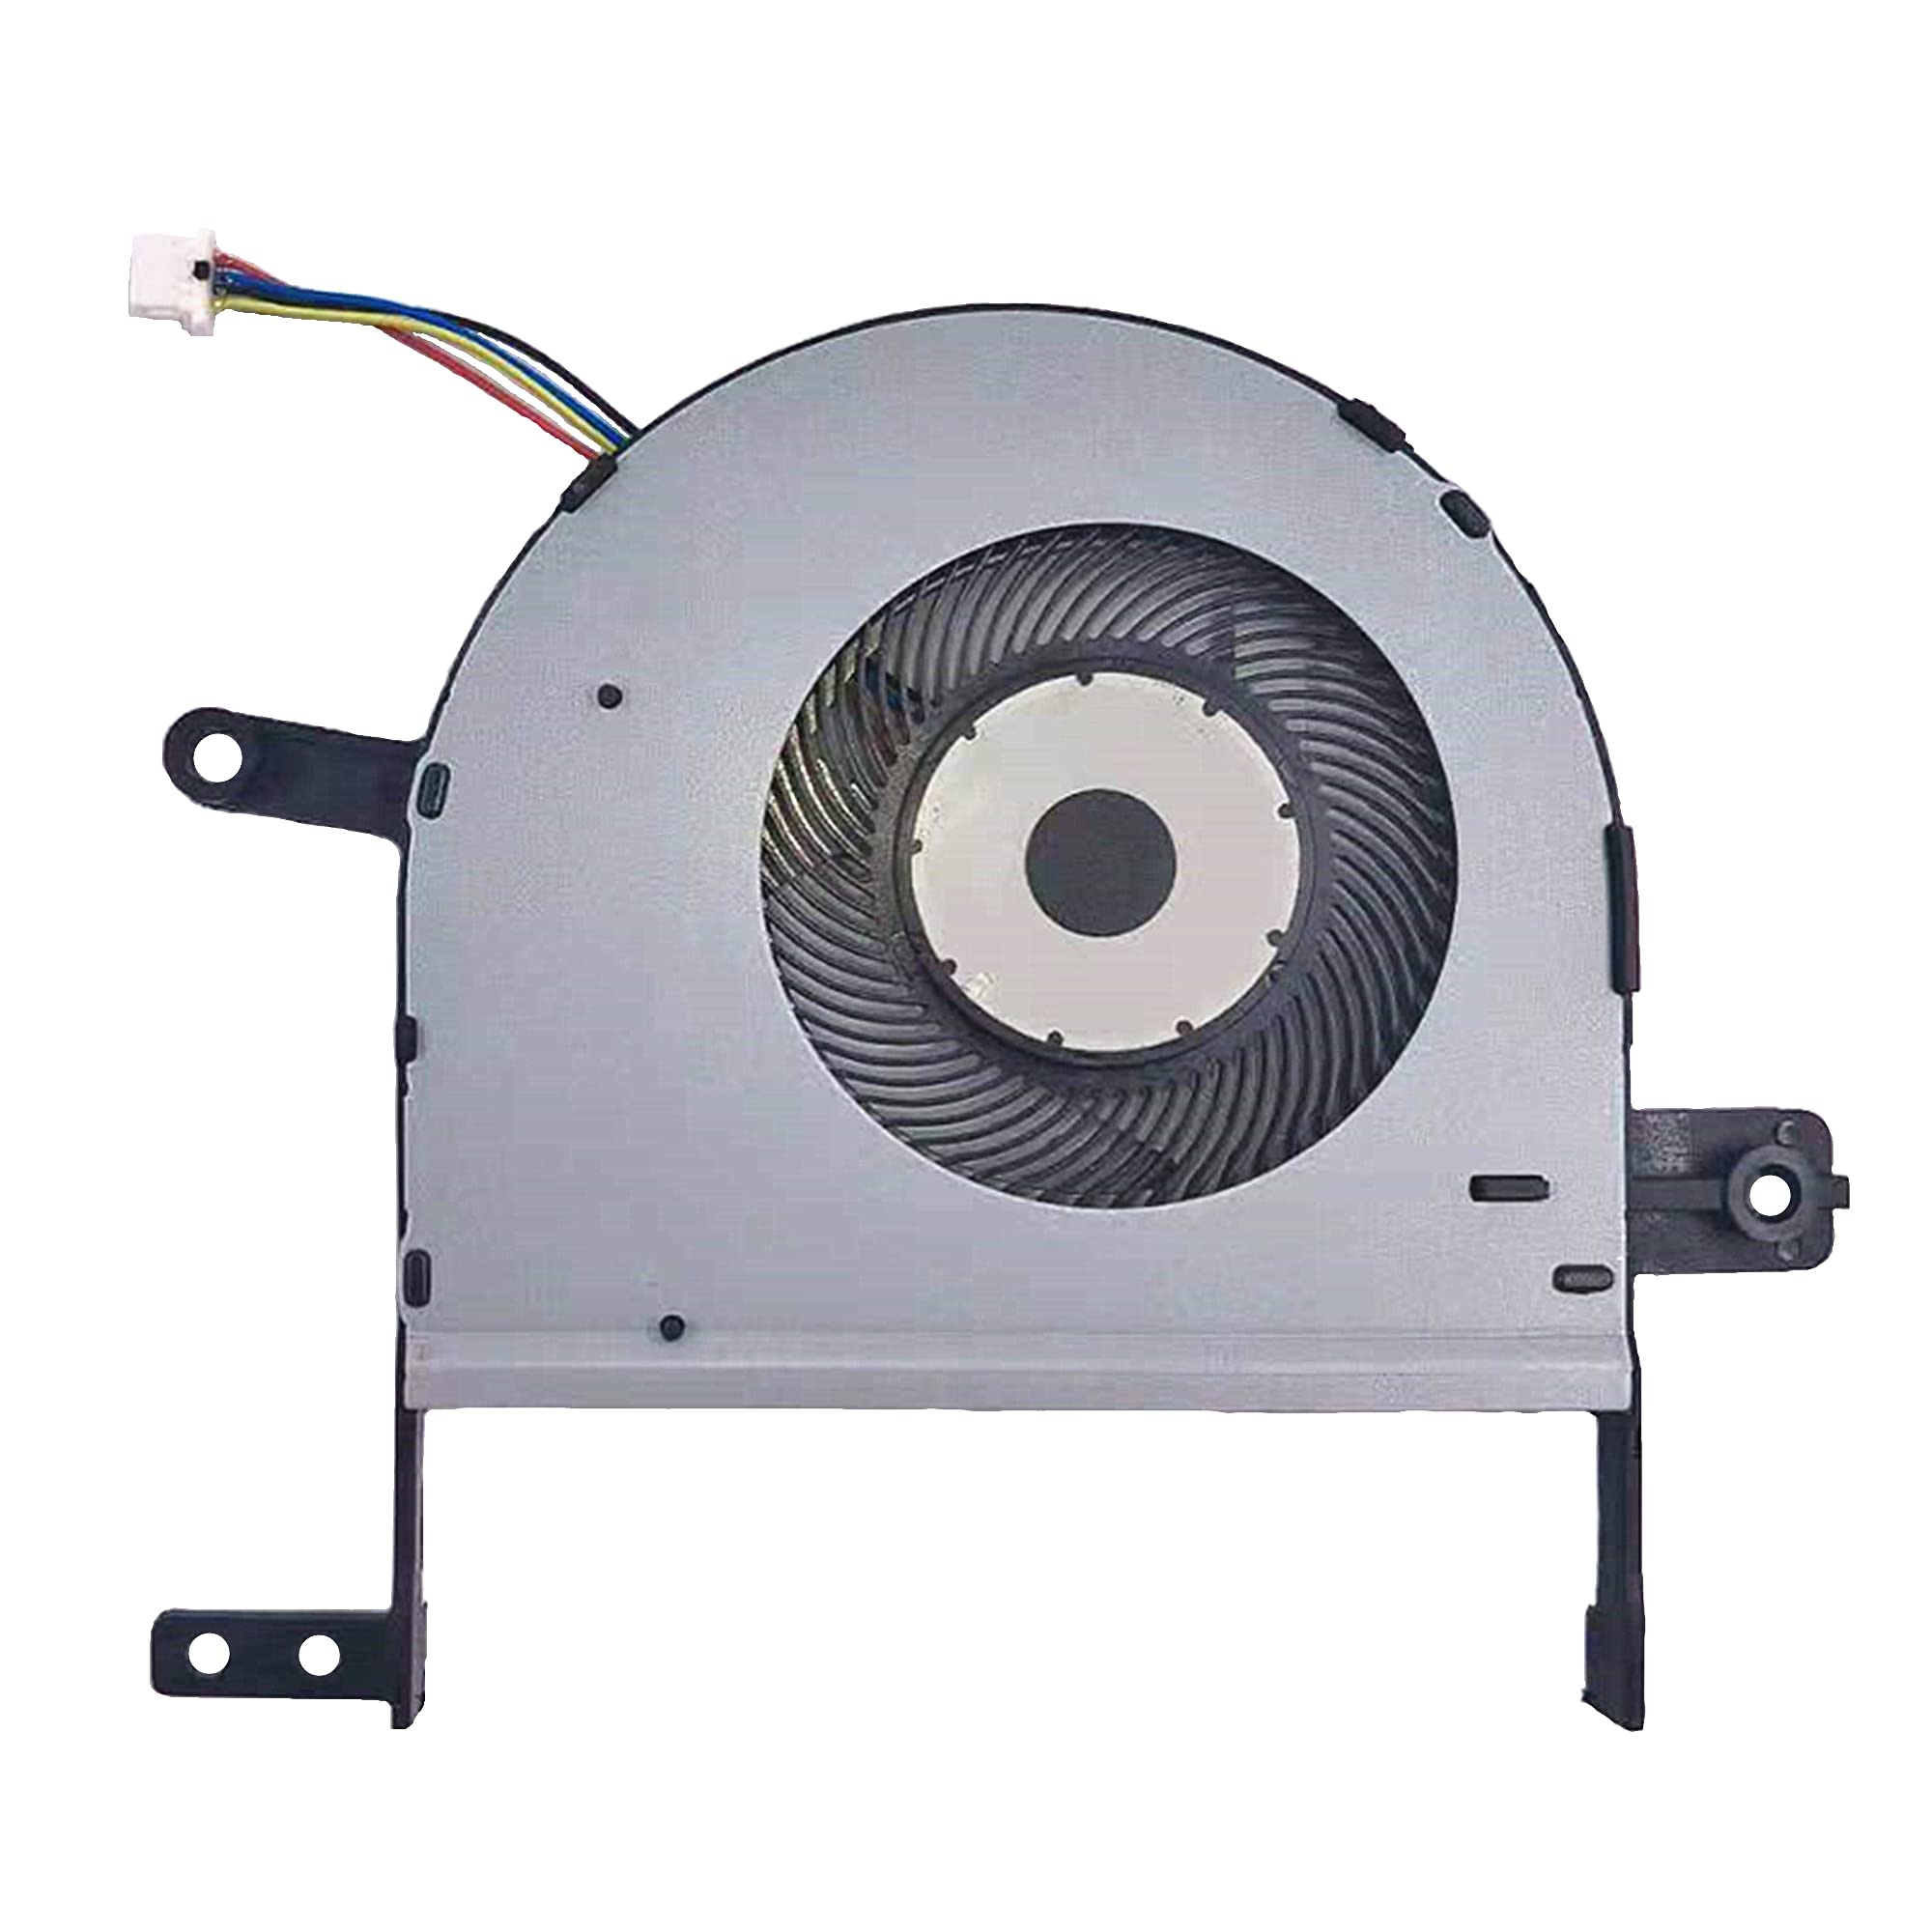 QUETTERLEE New CPU Cooling Fan for ASUS S15 S510 F510UA F510UA-AH51 F712FA-DB51 S510U S510UQ S510UA X510 X510U X510UA X510UN X510UQ X510UR X510UAR S5100 S5100U S5100UQ Series DFS531005PL0T FJPP Fan